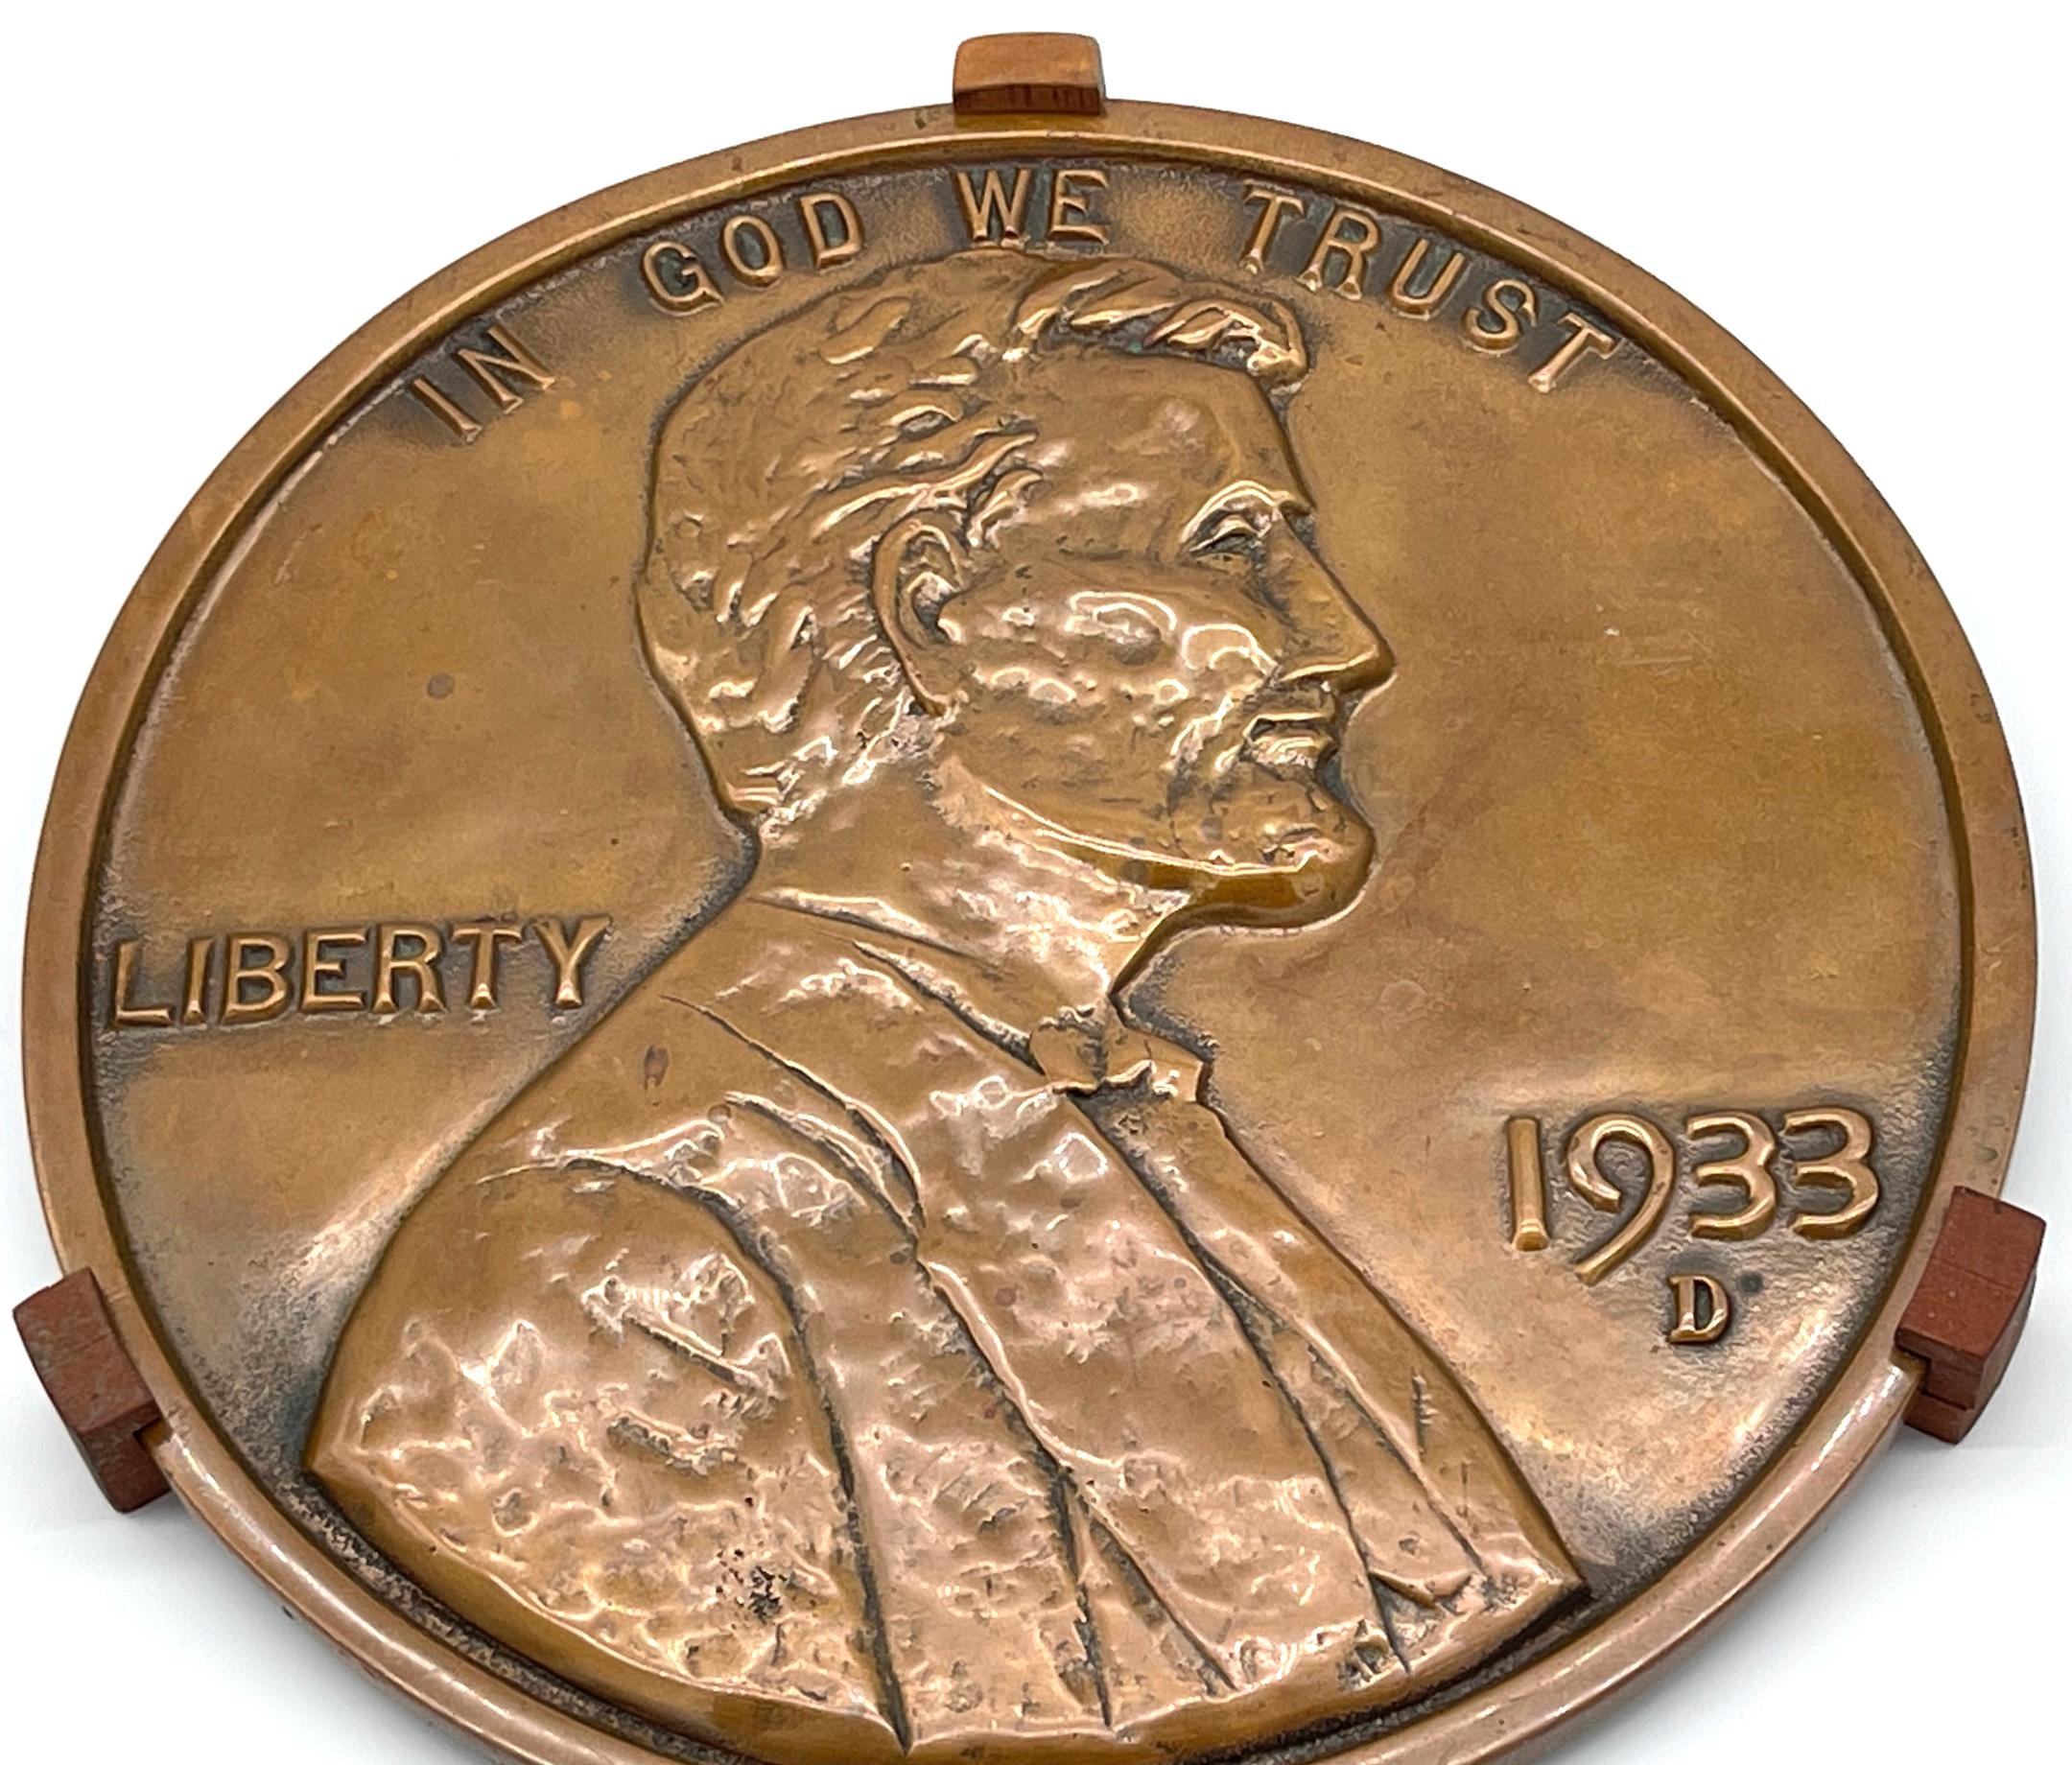 Maquette/Sculpture of Victor David Brenner's 1933 D Lincoln Penny Front/ Obverse For Sale 5